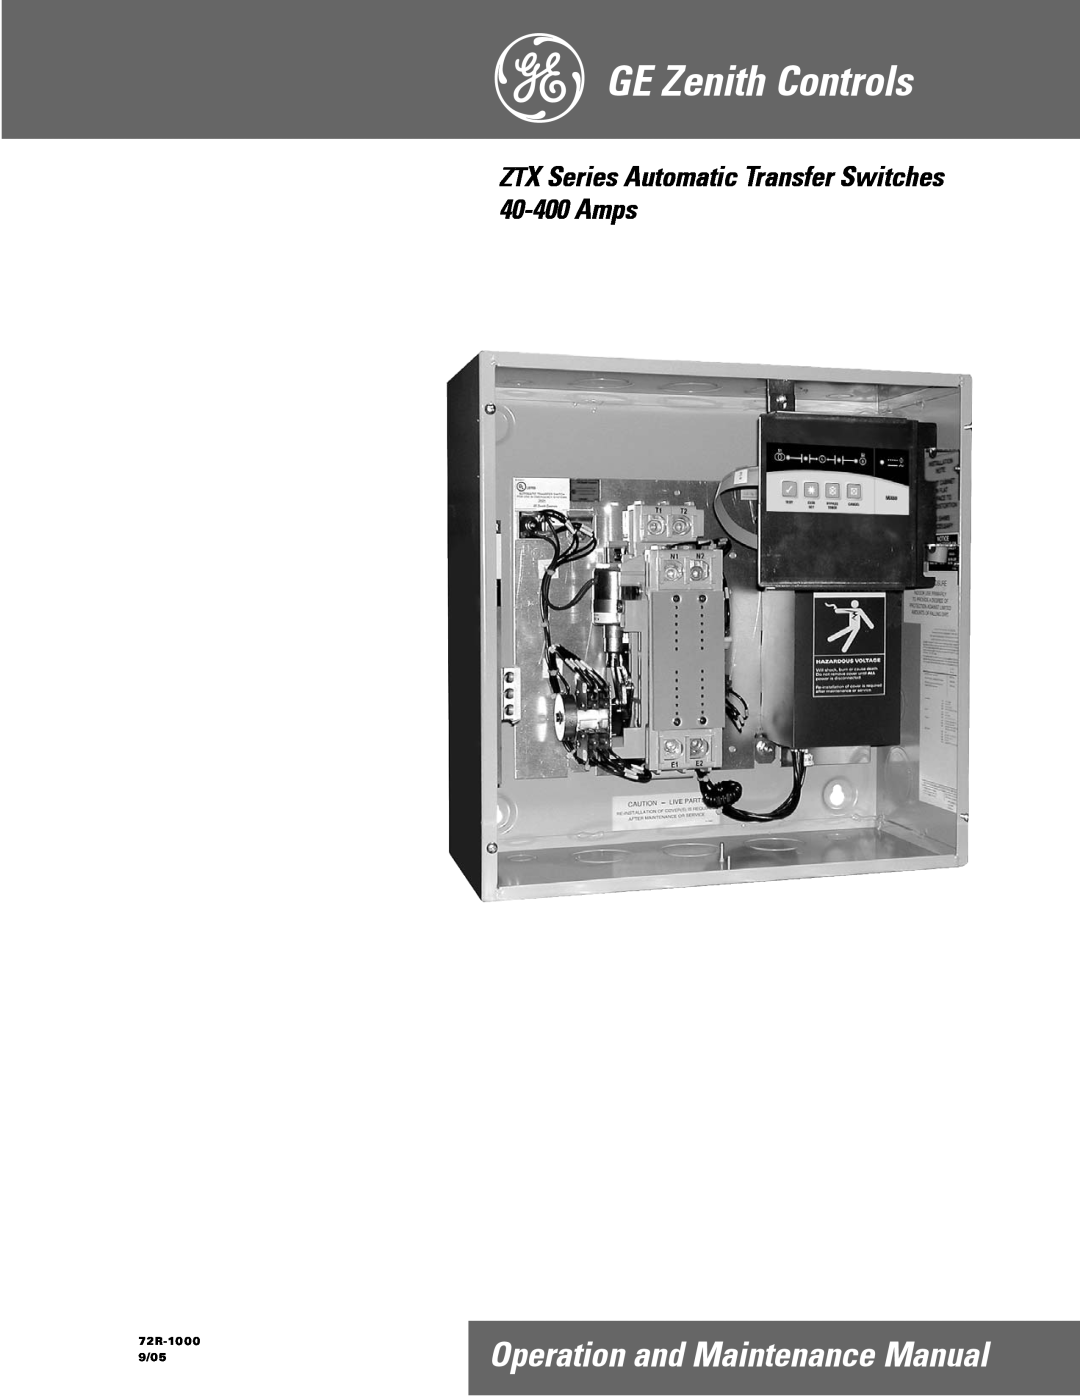 GE manual e GE Zenith Controls, Operation and Maintenance Manual, ZTX Series Automatic Transfer Switches 40-400Amps 